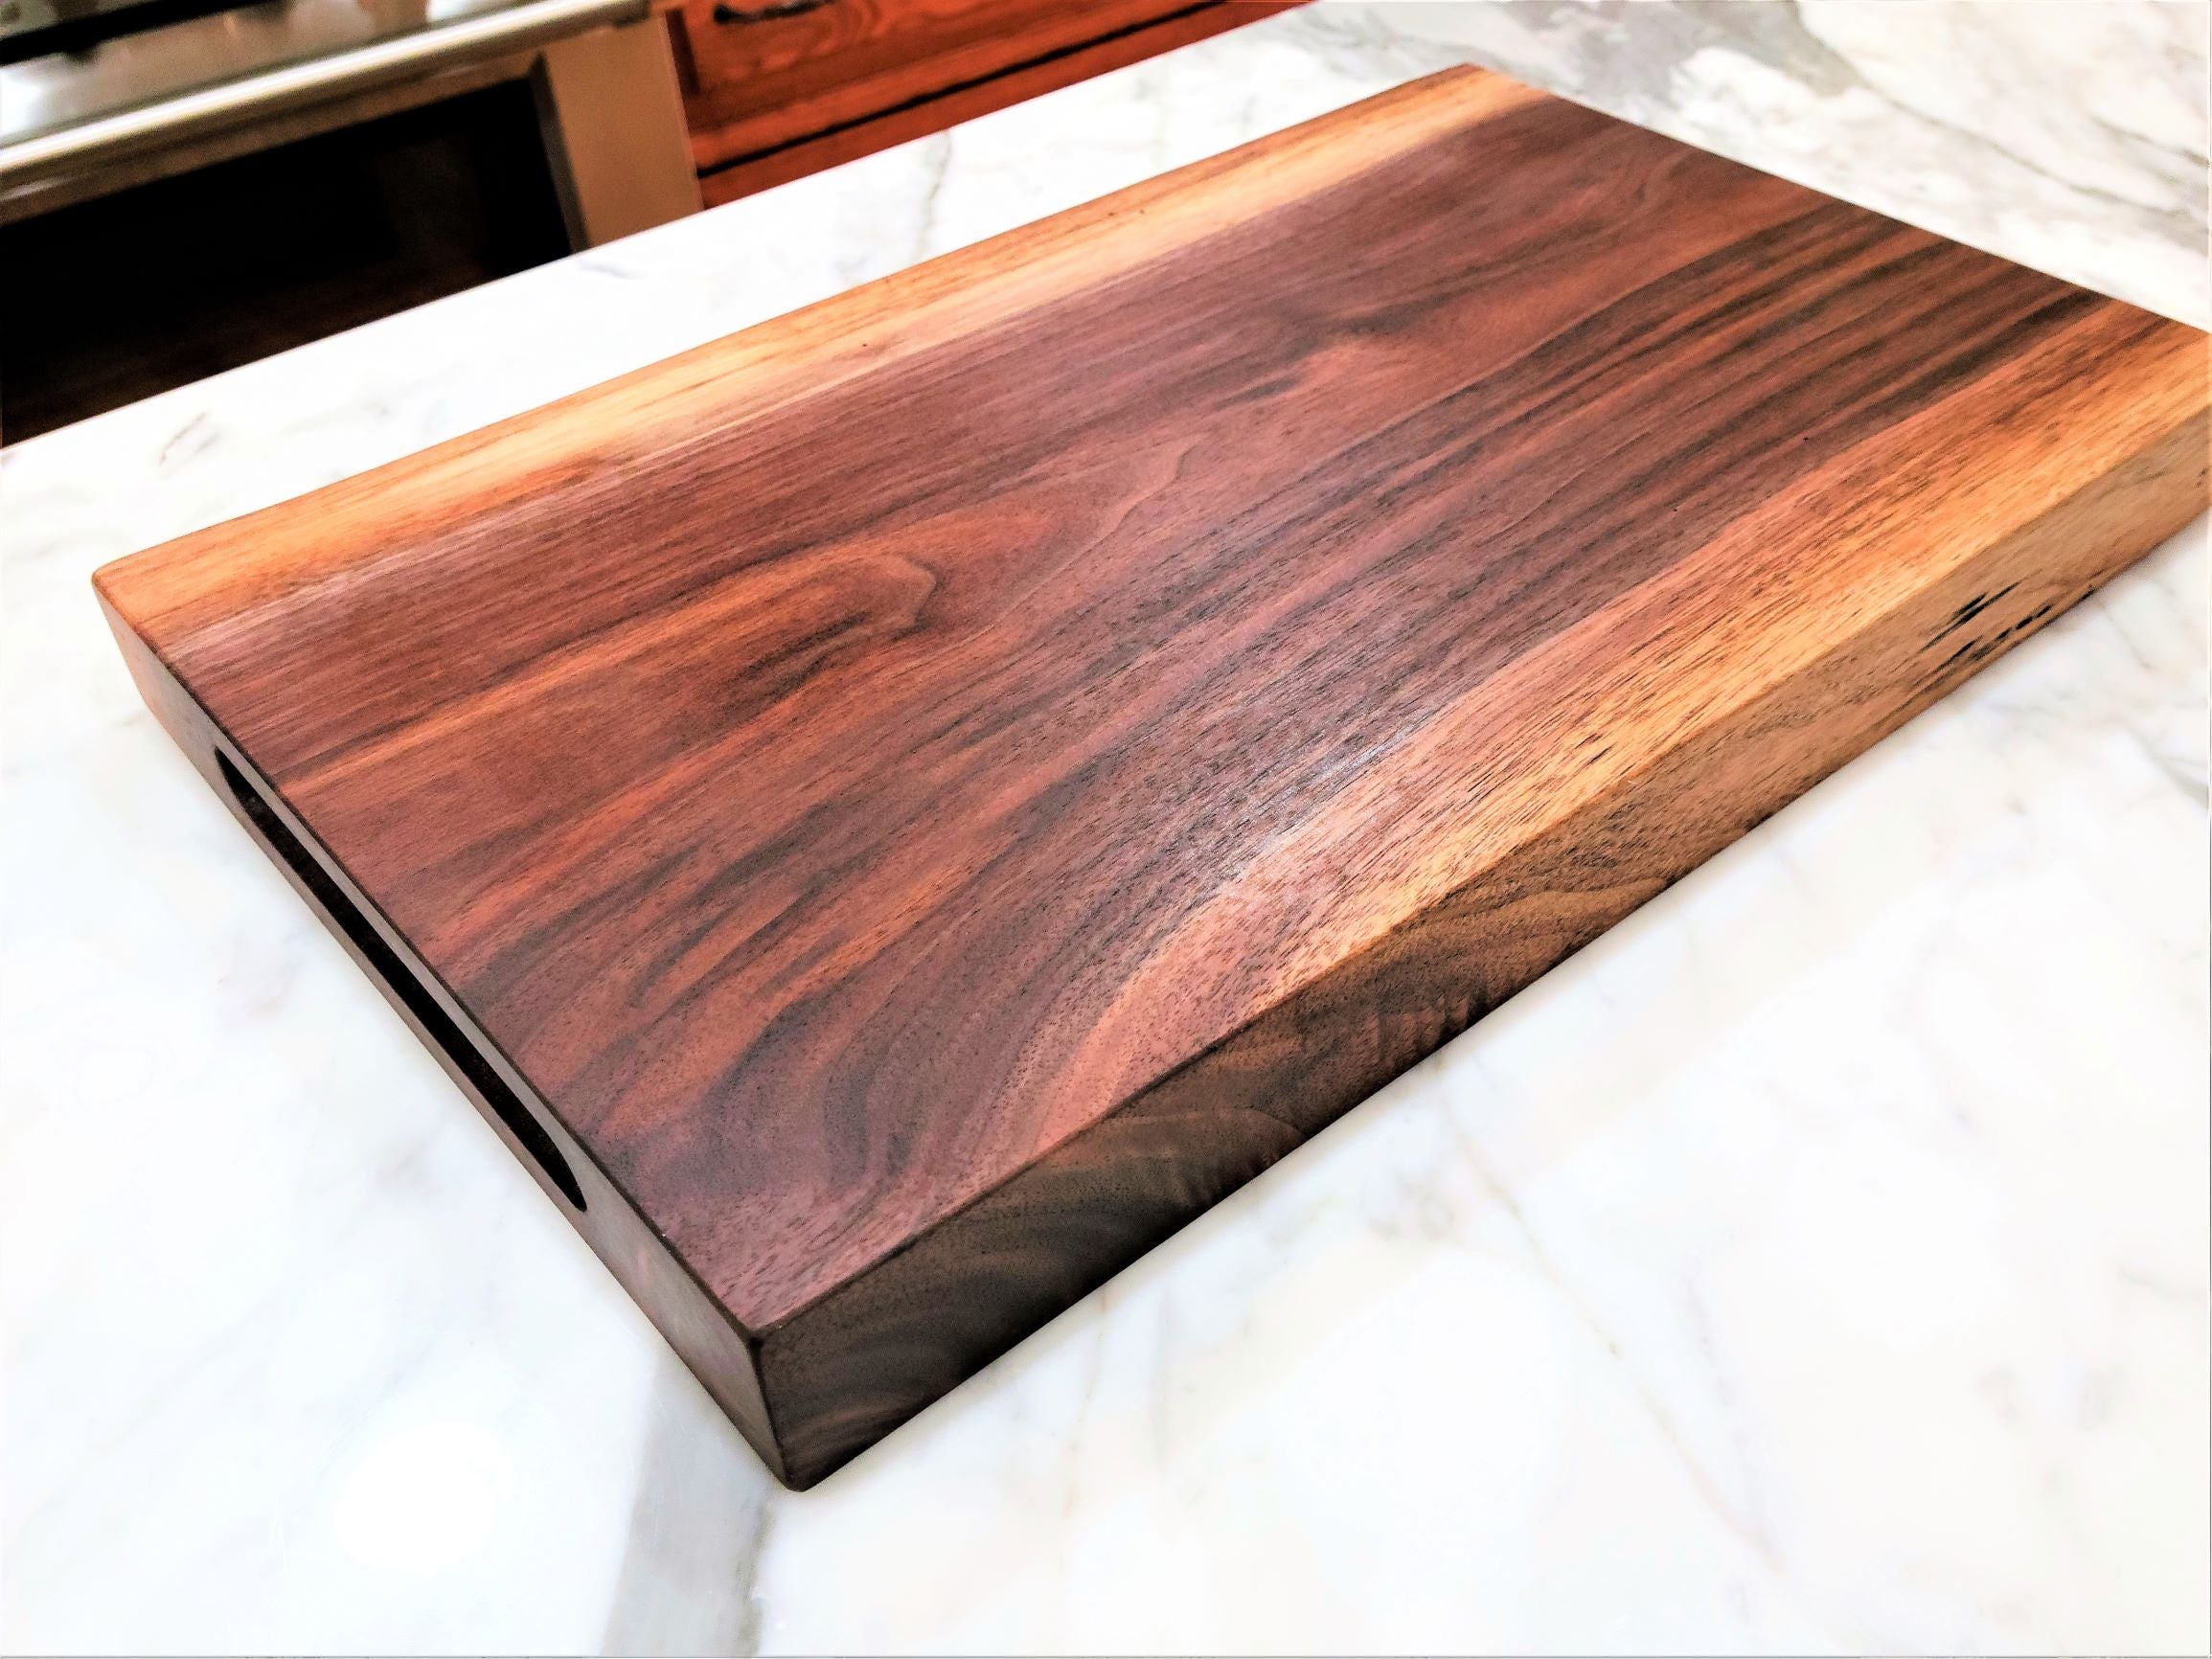 Wood cutting board made from a thick piece of walnut.  Available in a flat edge or live edge.  Made in USA by ZIM Boards.